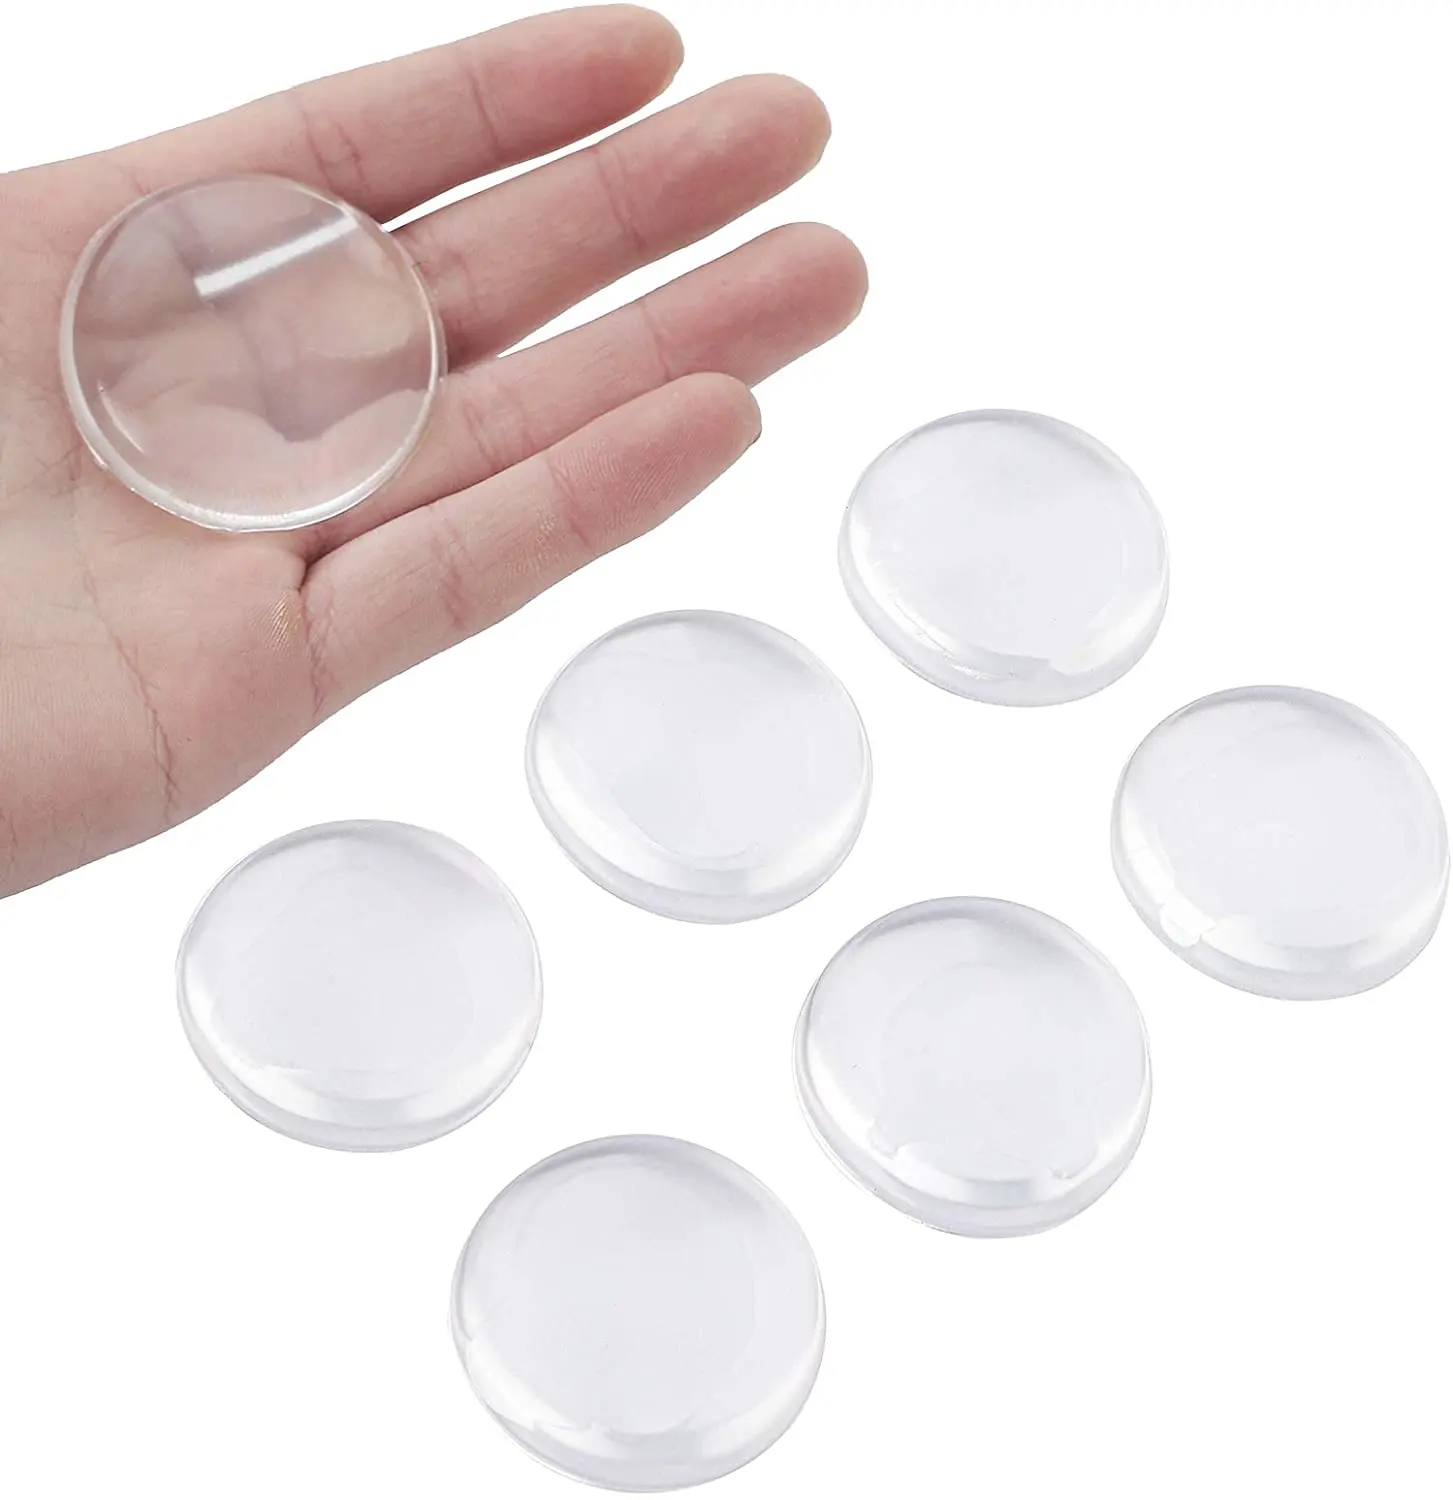 2022 Clear wall protector transparent door stopper self-adhesive reusable and removable